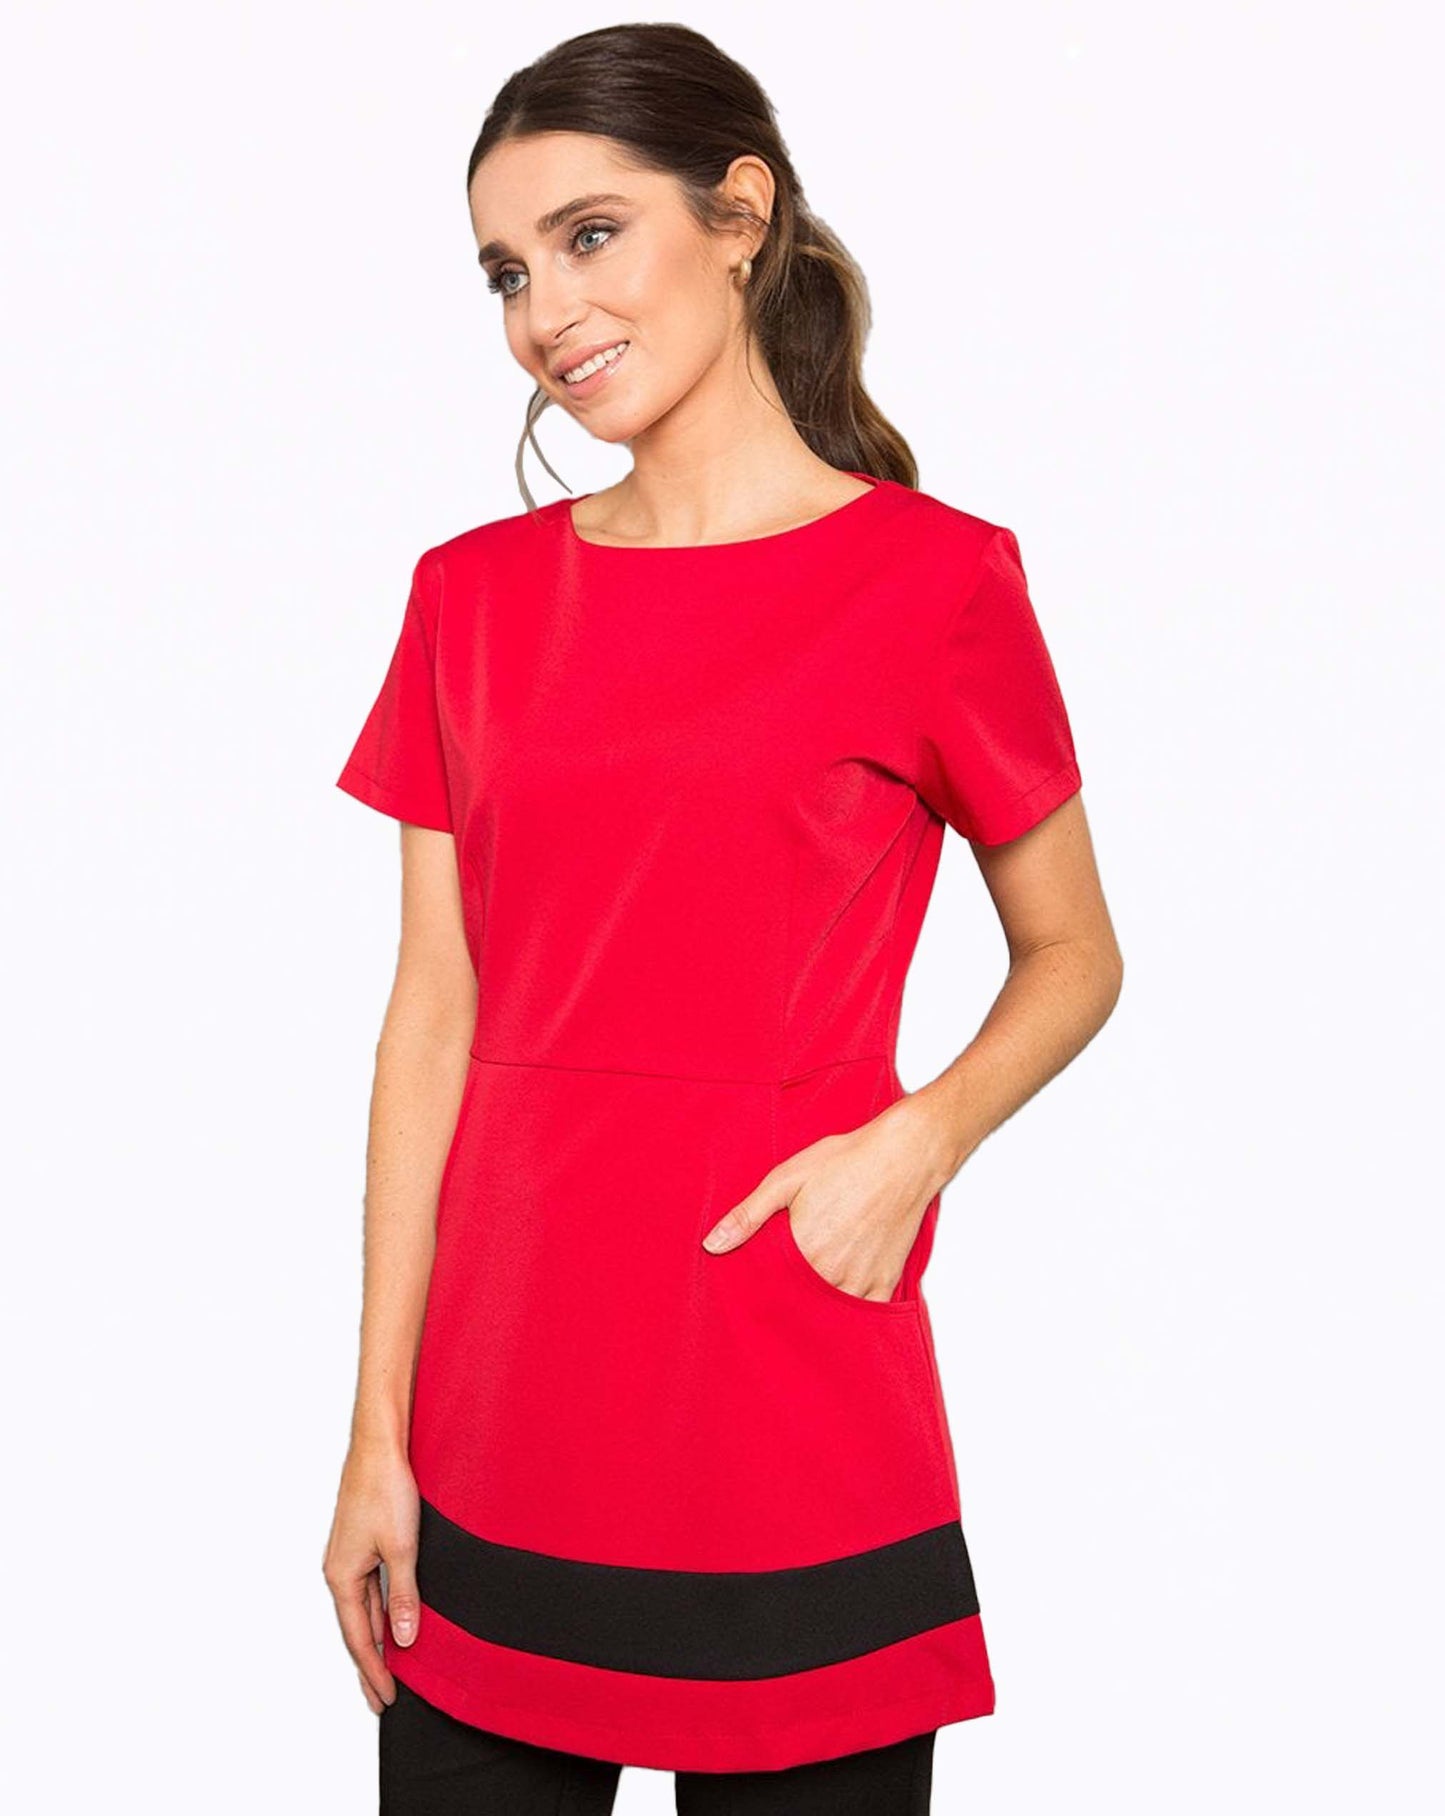 Red tunic with two pockets